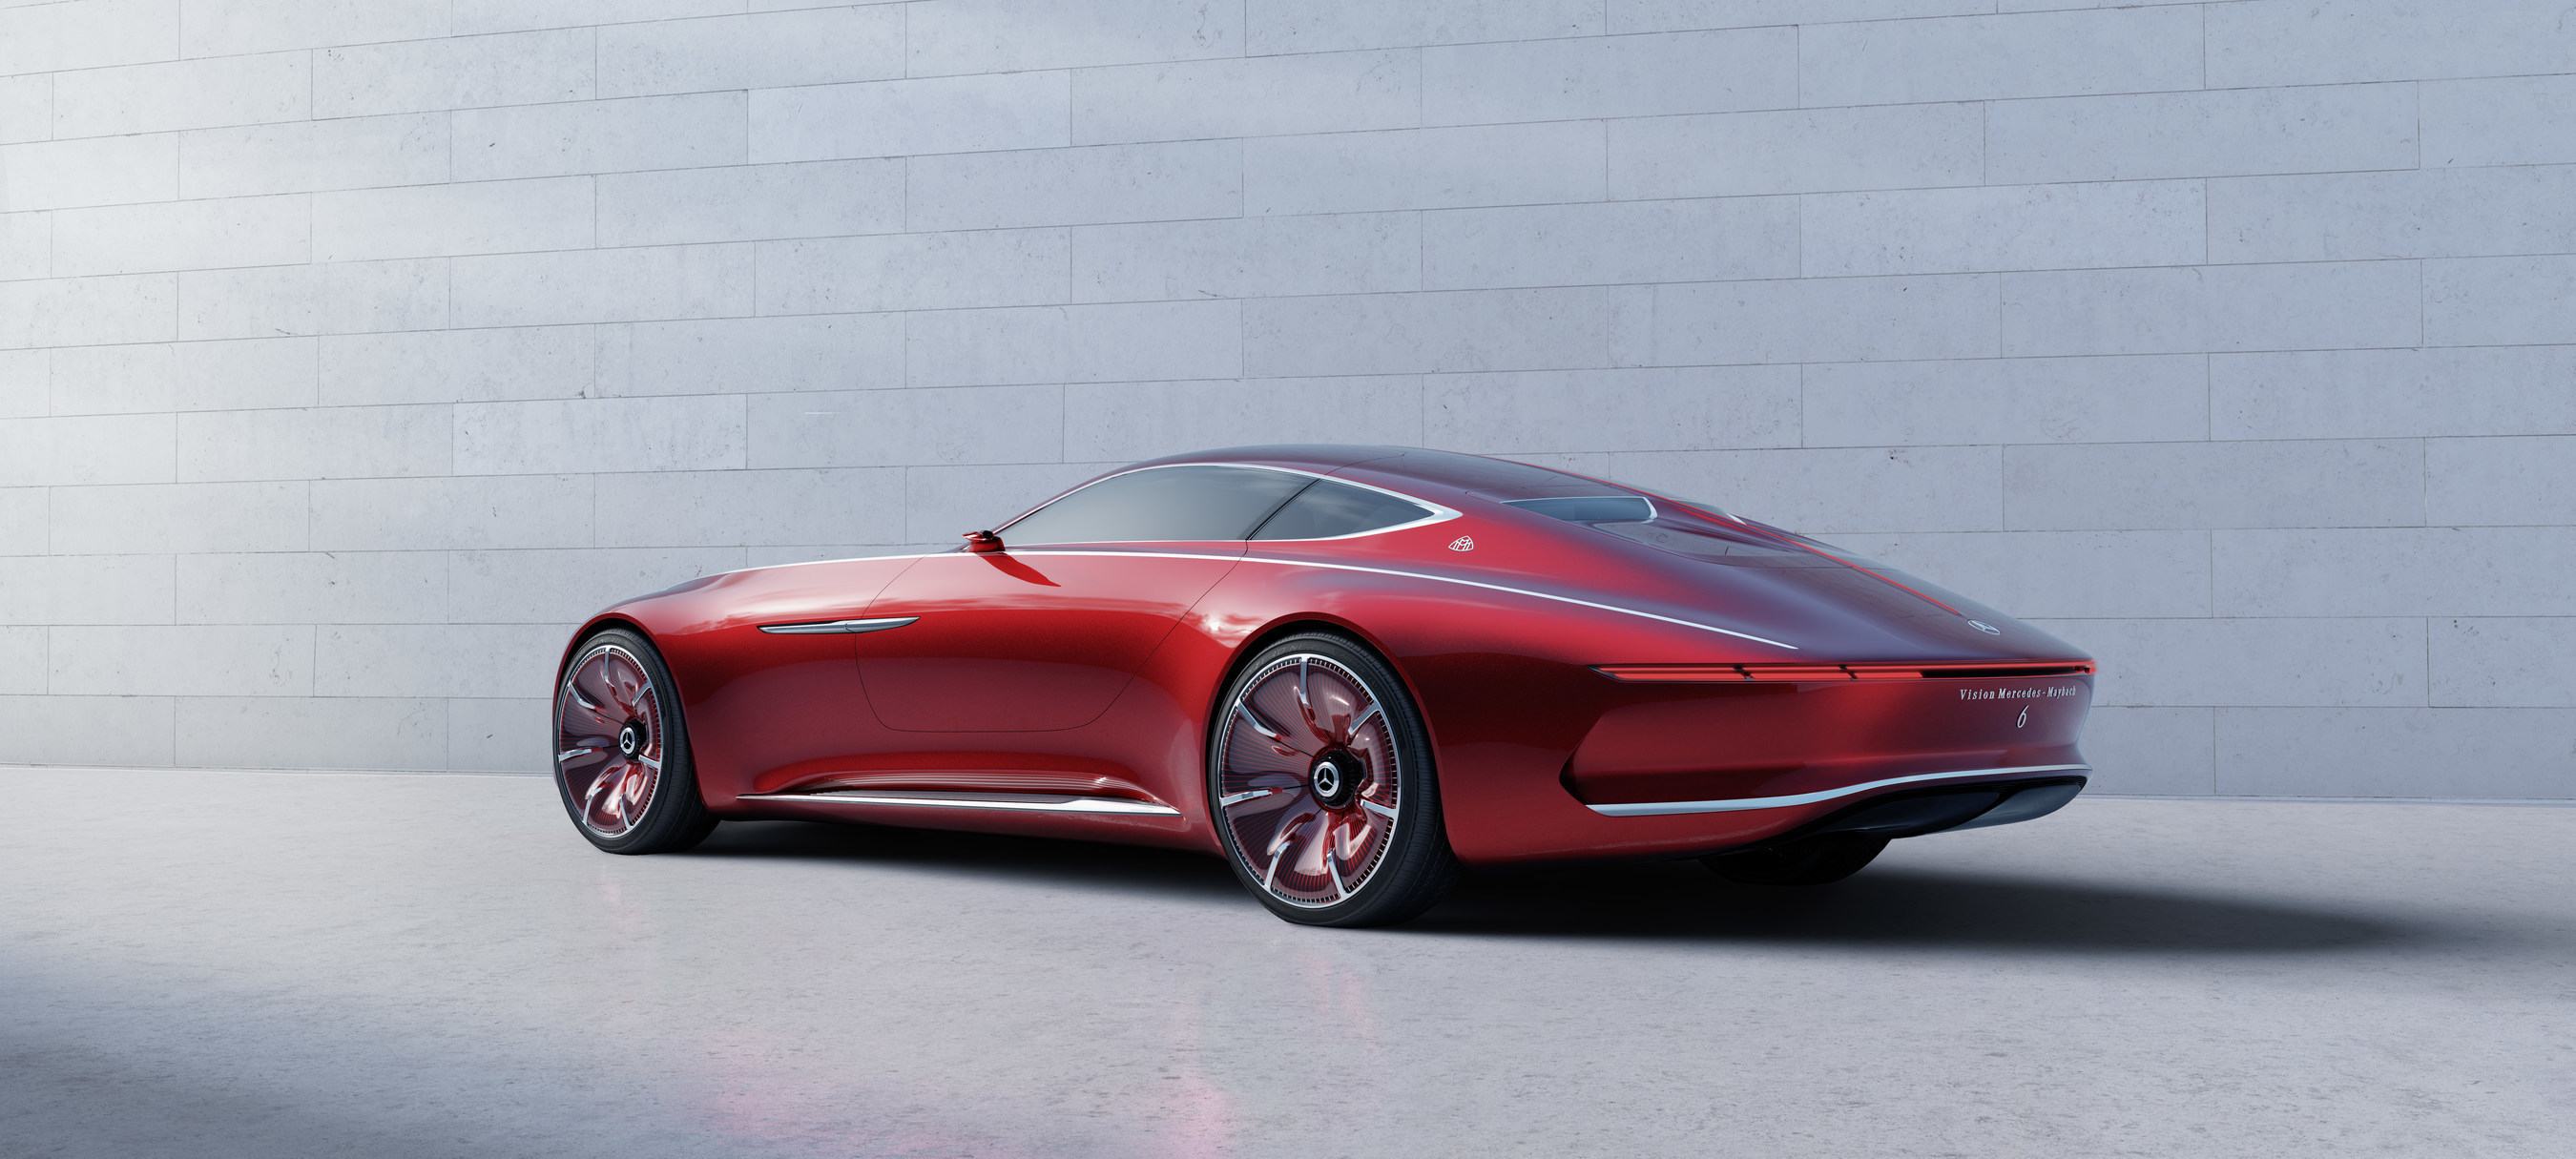 The Vision Mercedes-Maybach 6 made its world debut today in Pebble Beach, CA